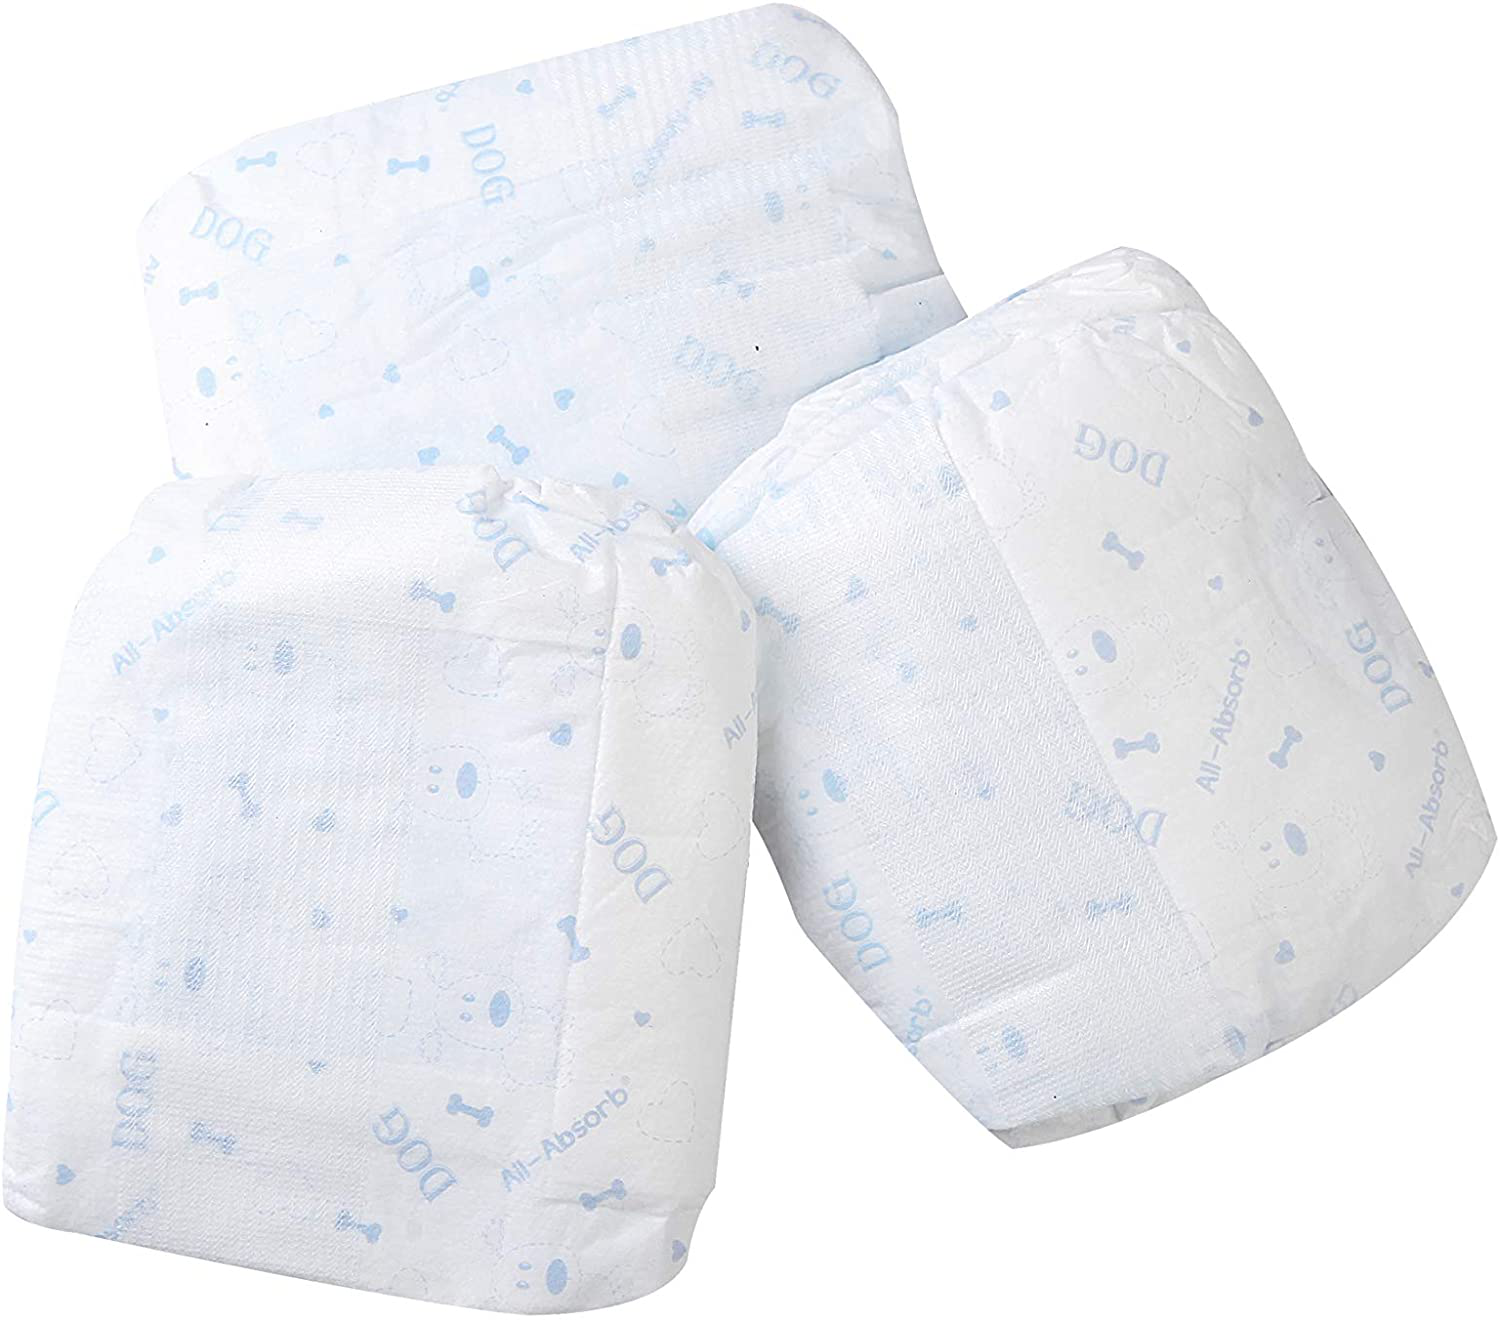 All-Absorb Disposable Female Dog Diapers, Medium